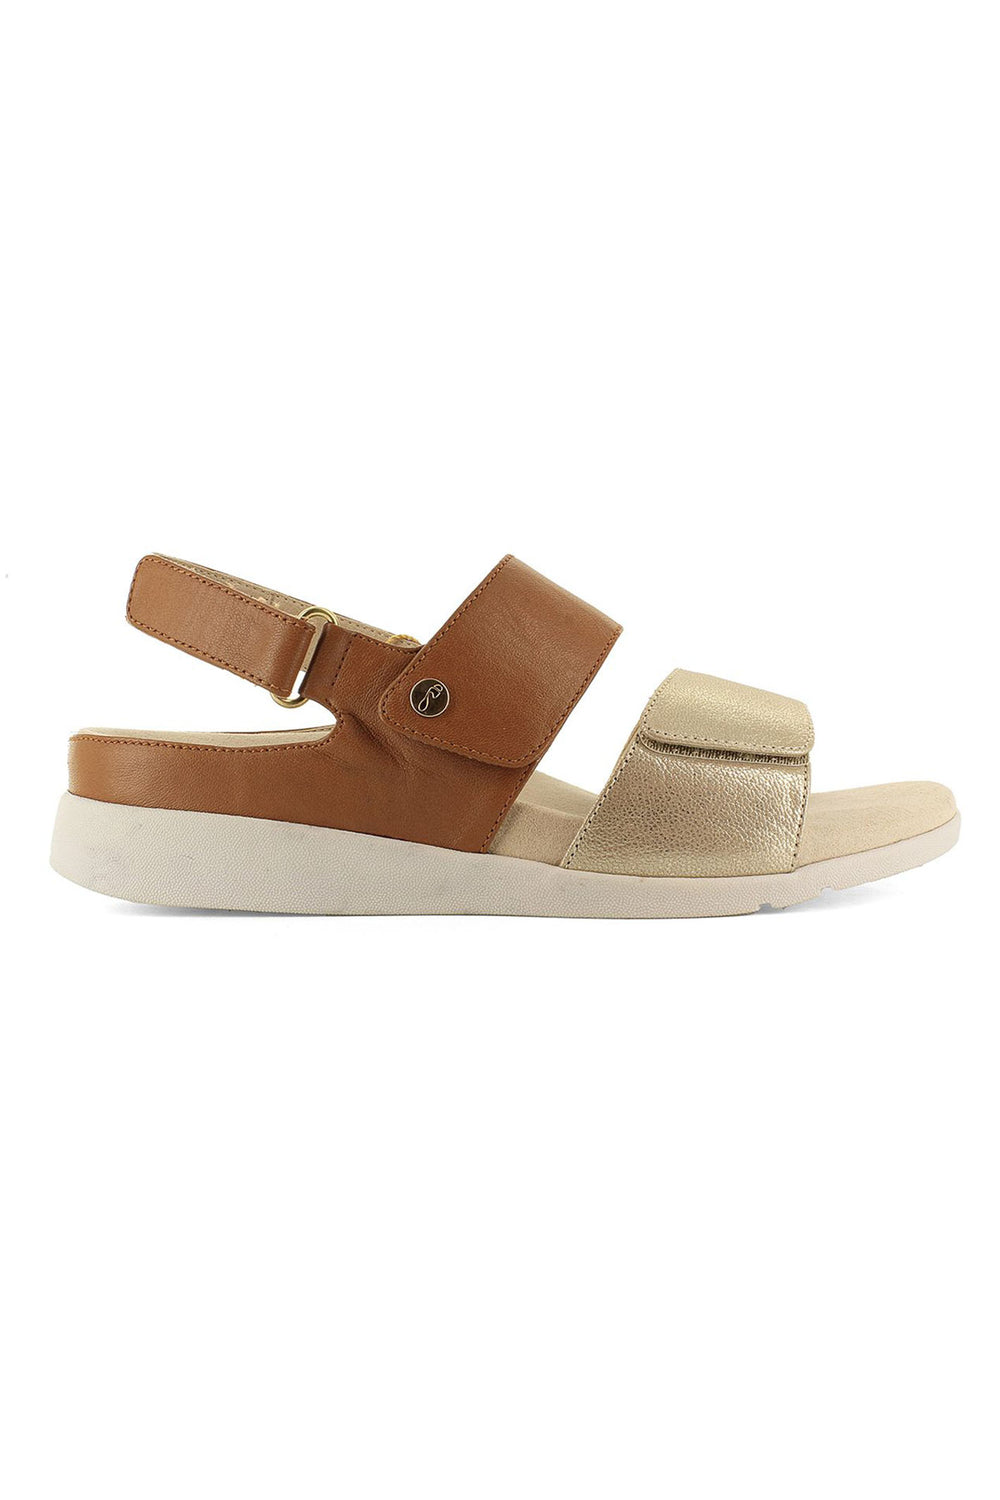 Strive Riviera Tan Brown Velco Strap Memory Foam Footbed Leather Sandal - Shirley Allum Boutique